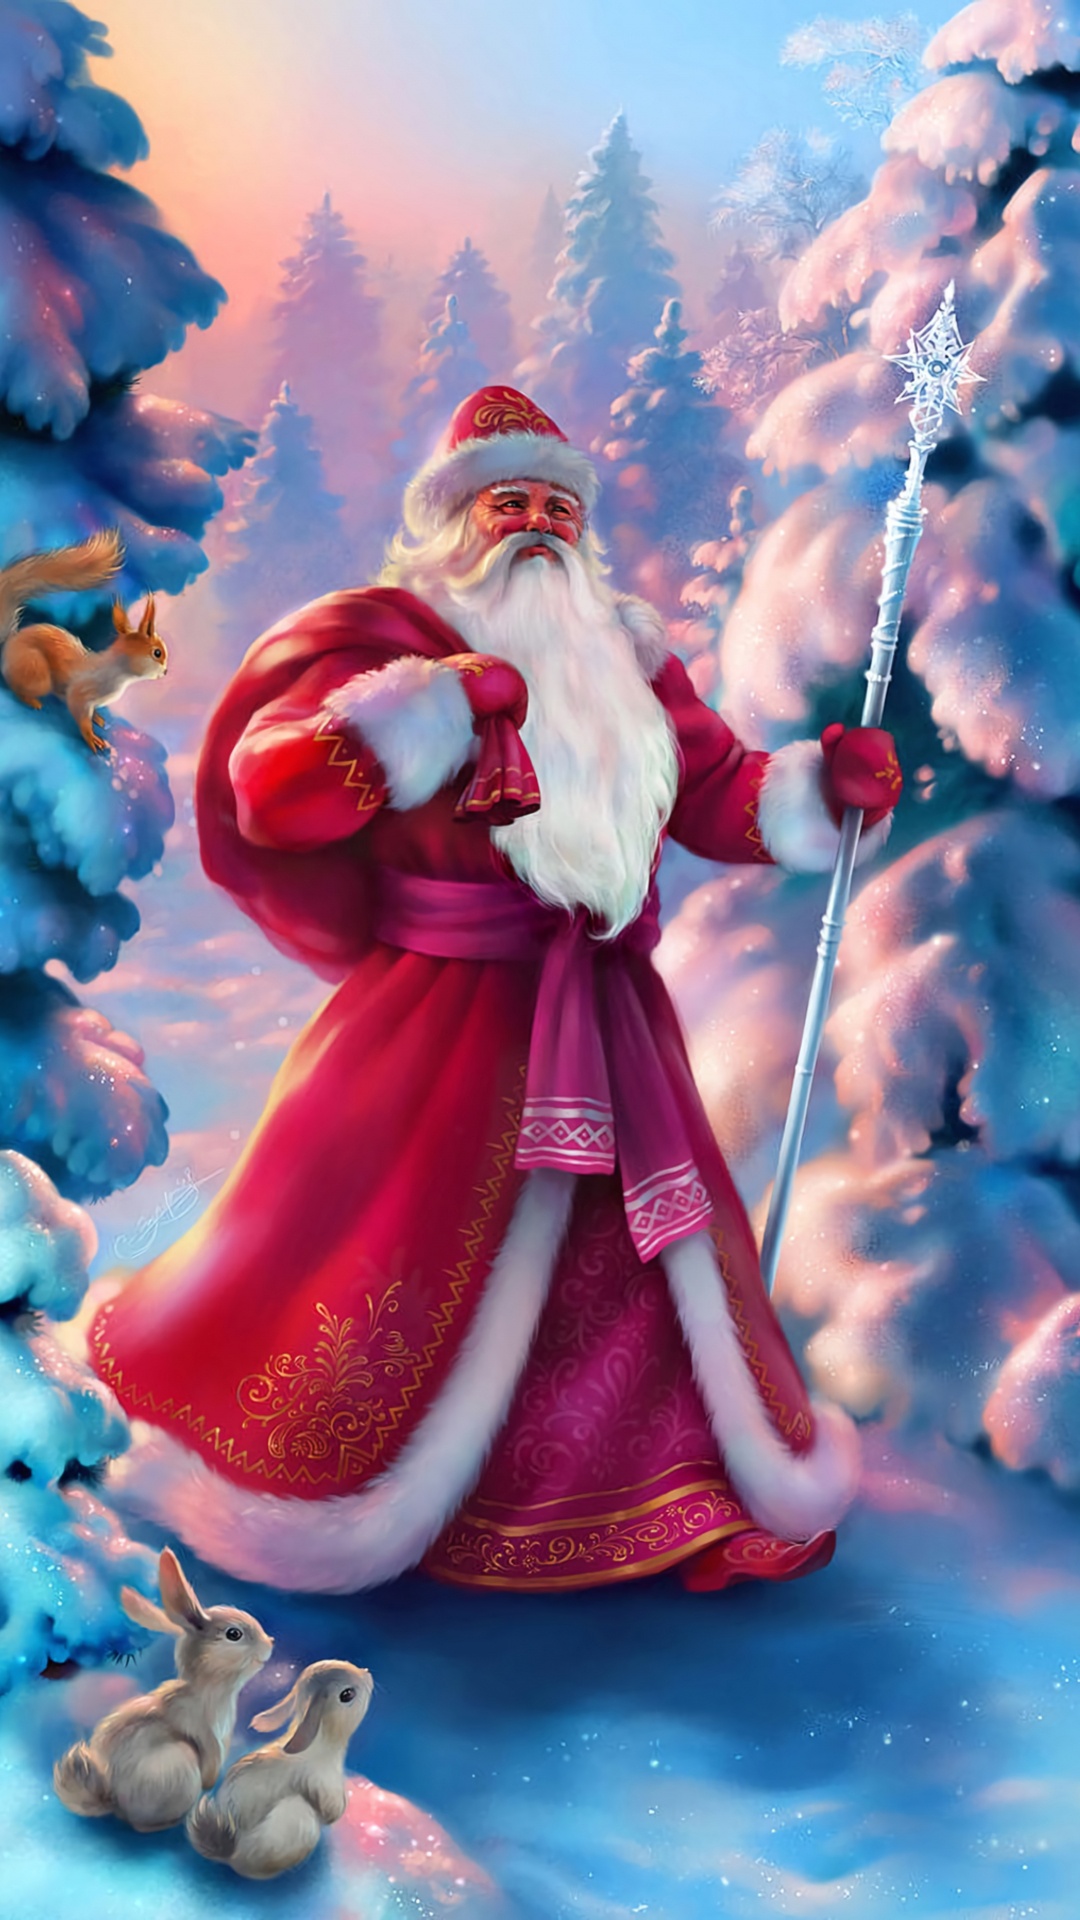 Santa Claus, Ded Moroz, Christmas Day, Christmas, Animation. Wallpaper in 1080x1920 Resolution